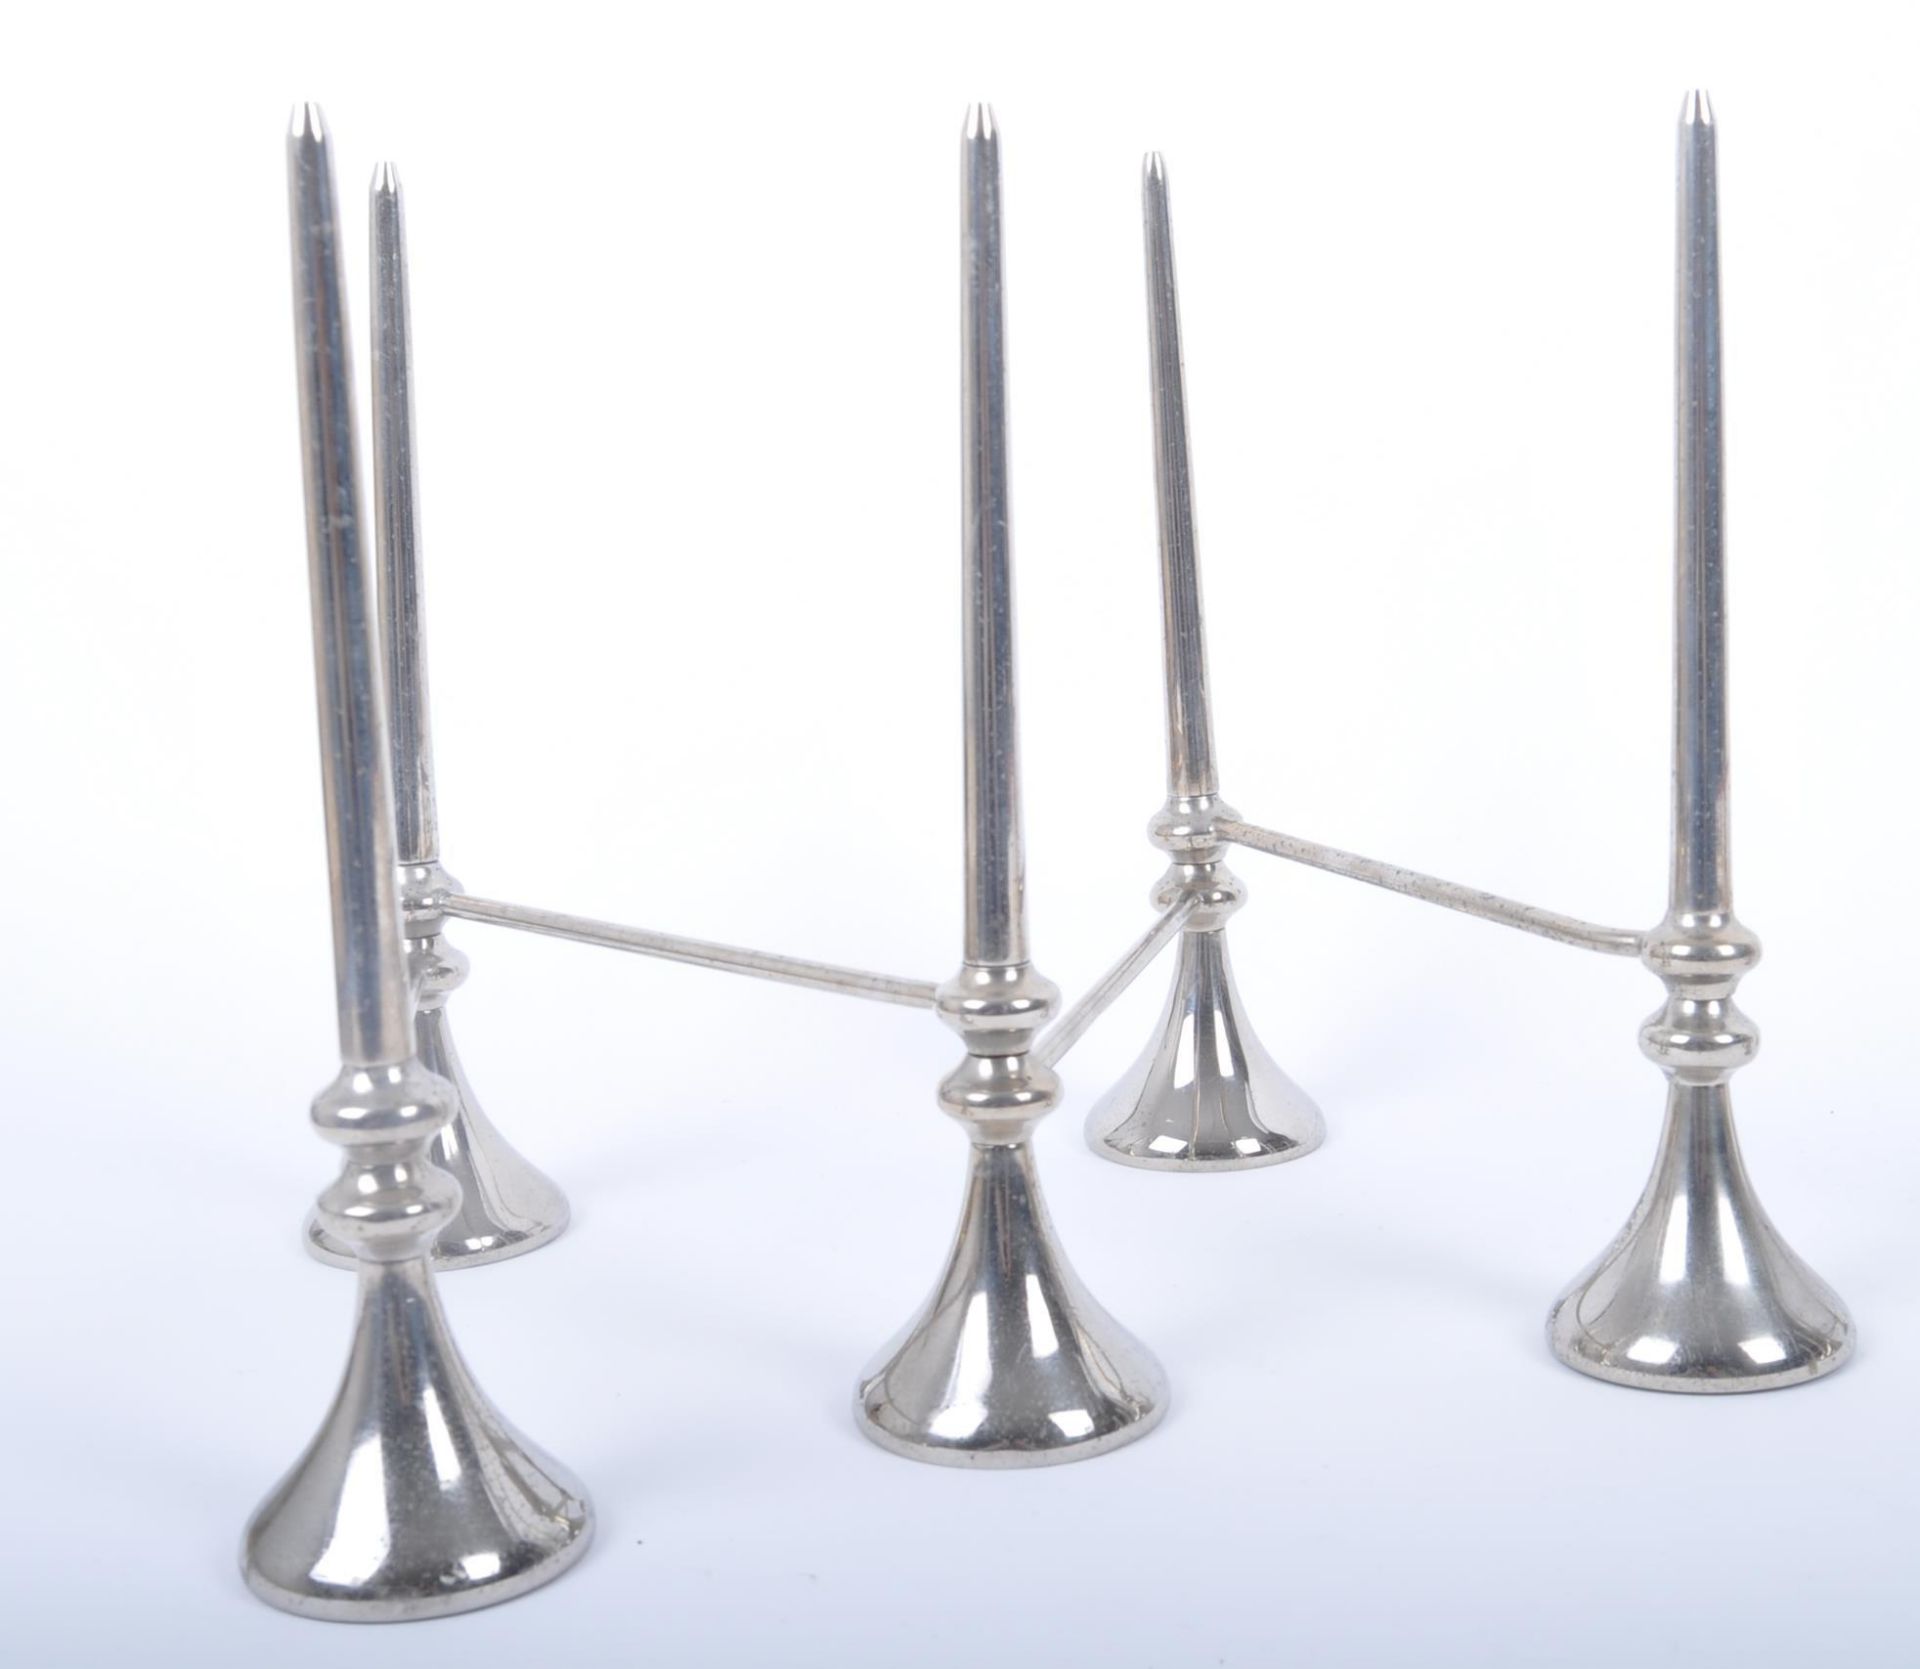 PAIR OF RETRO VINTAGE CHROME ARTICULATED CANDLE HOLDERS - Image 3 of 6